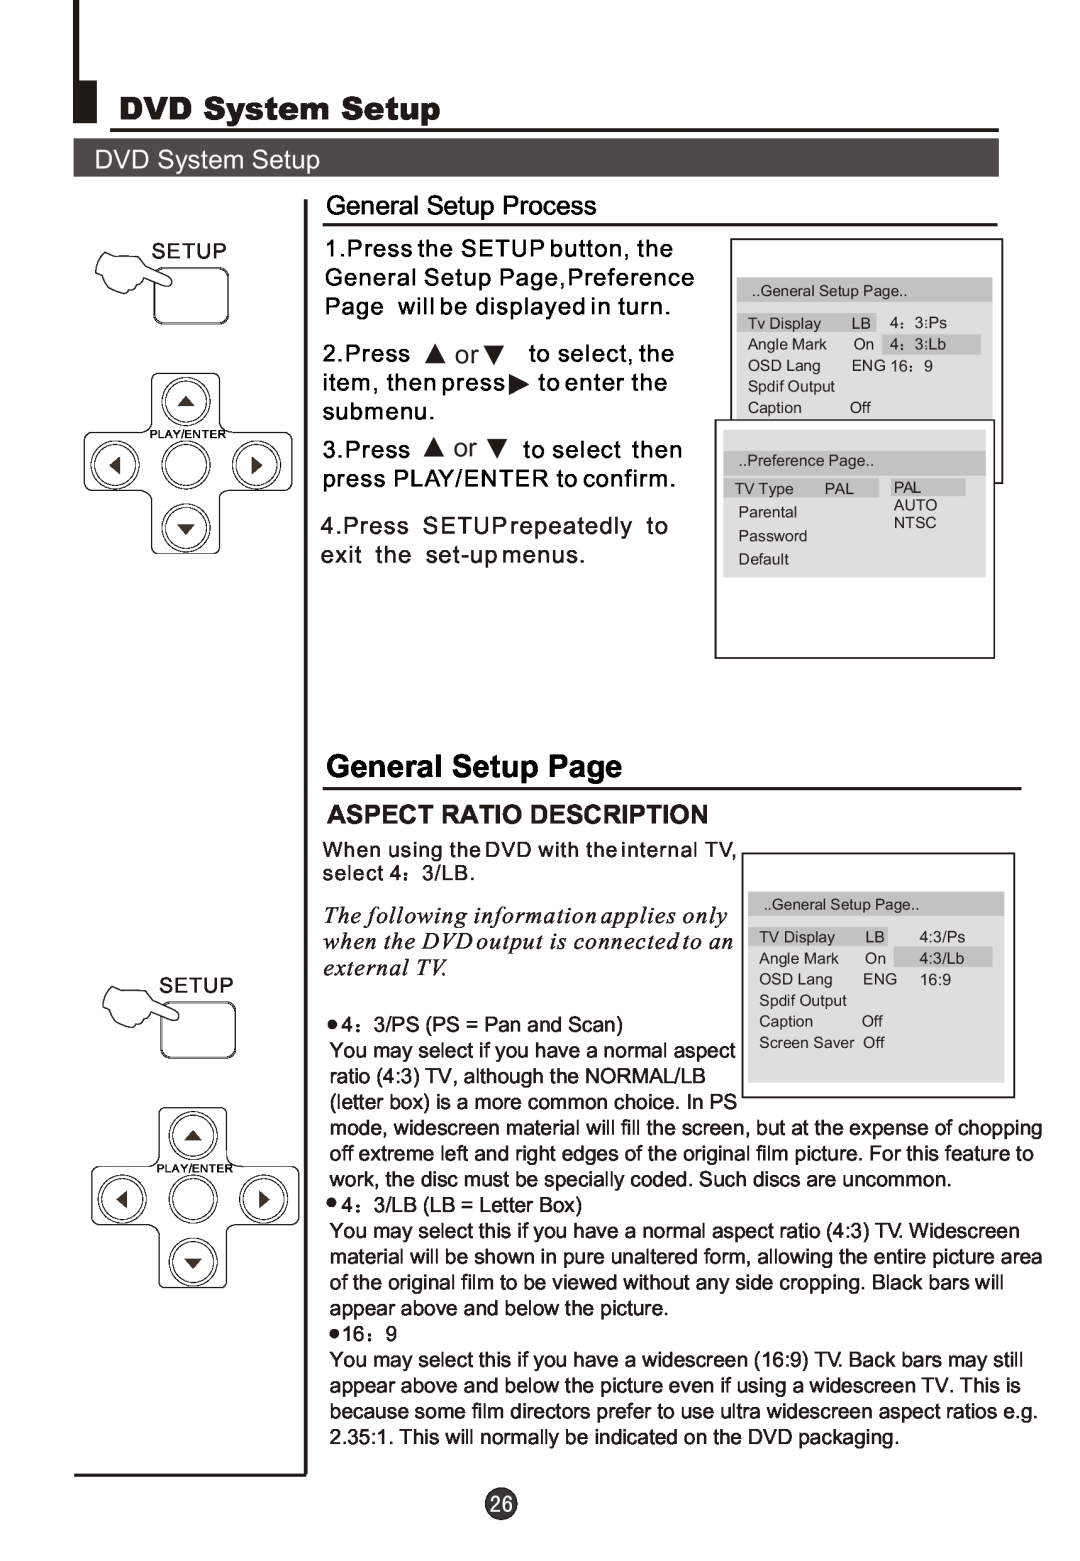 Haier DTA21F98 DVD System Setup, General Setup Page, Aspect Ratio Description, The following information applies only 